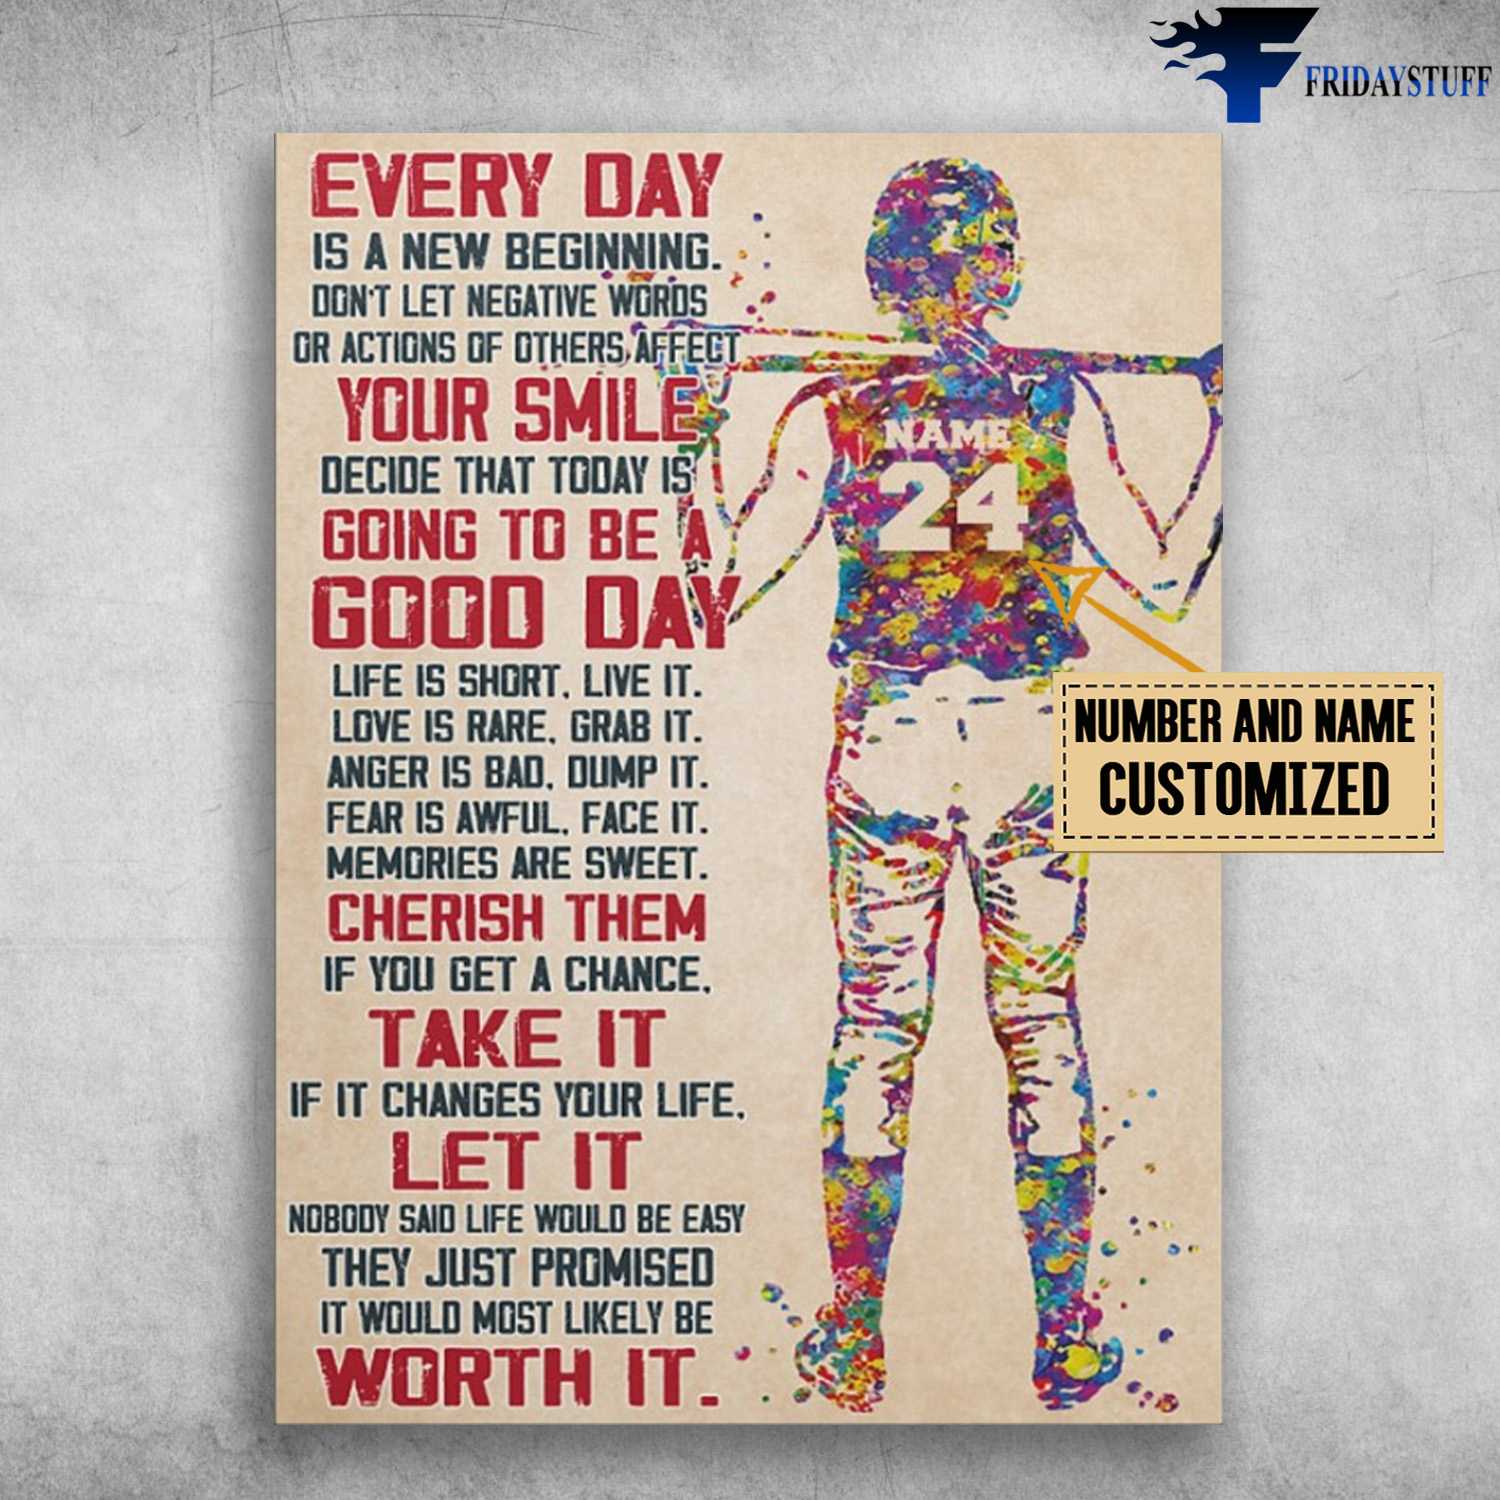 Baseball Poster, Baseball Decor, Every Day Is A New Beggining, Don't Let Negtive Words, Or Actions Of Others Affect, Your Smile Decide That Today, Is Going To Be A Good Day